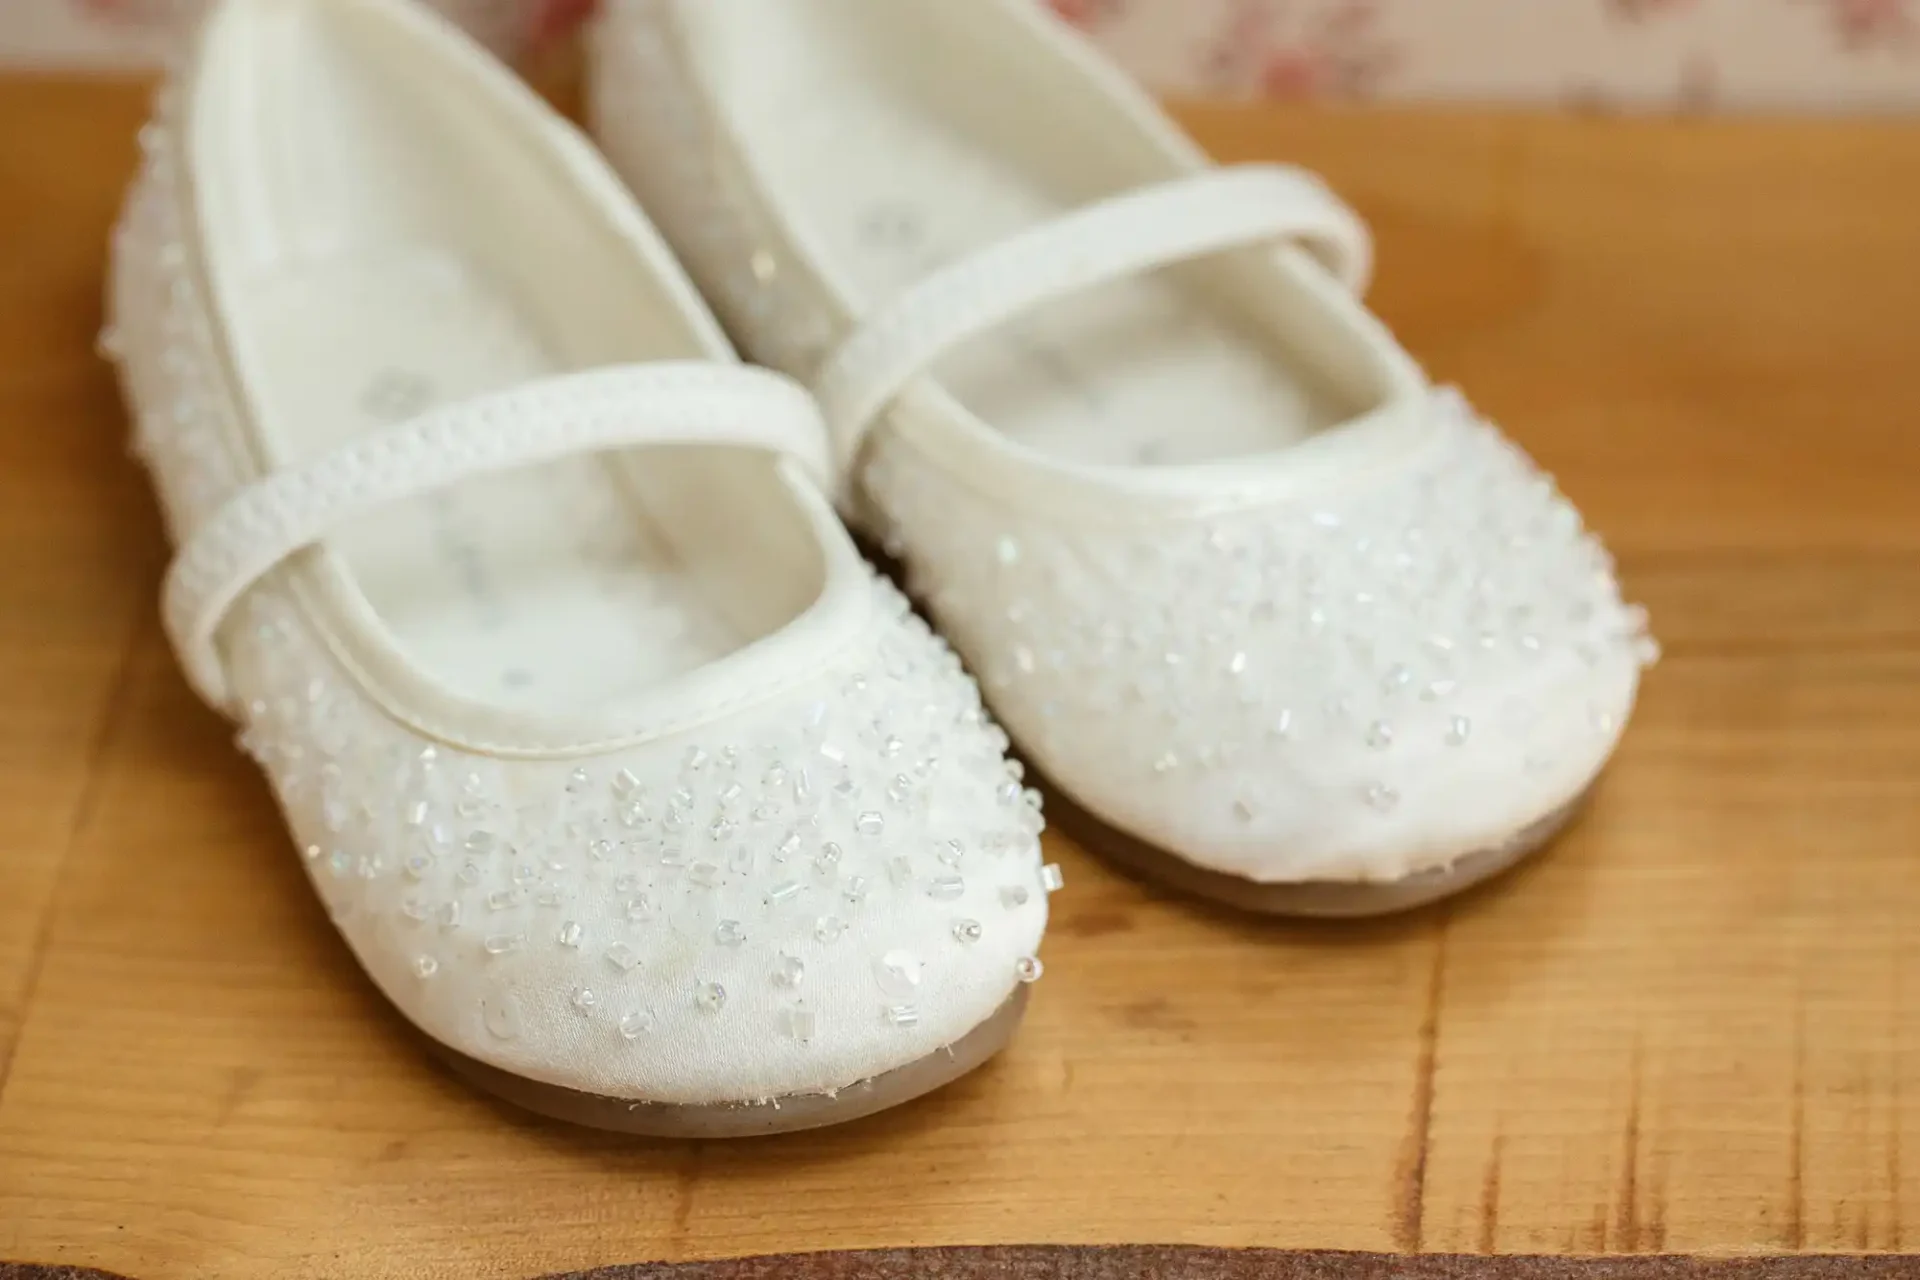 A pair of white, beaded children's ballet flats on a wooden surface.